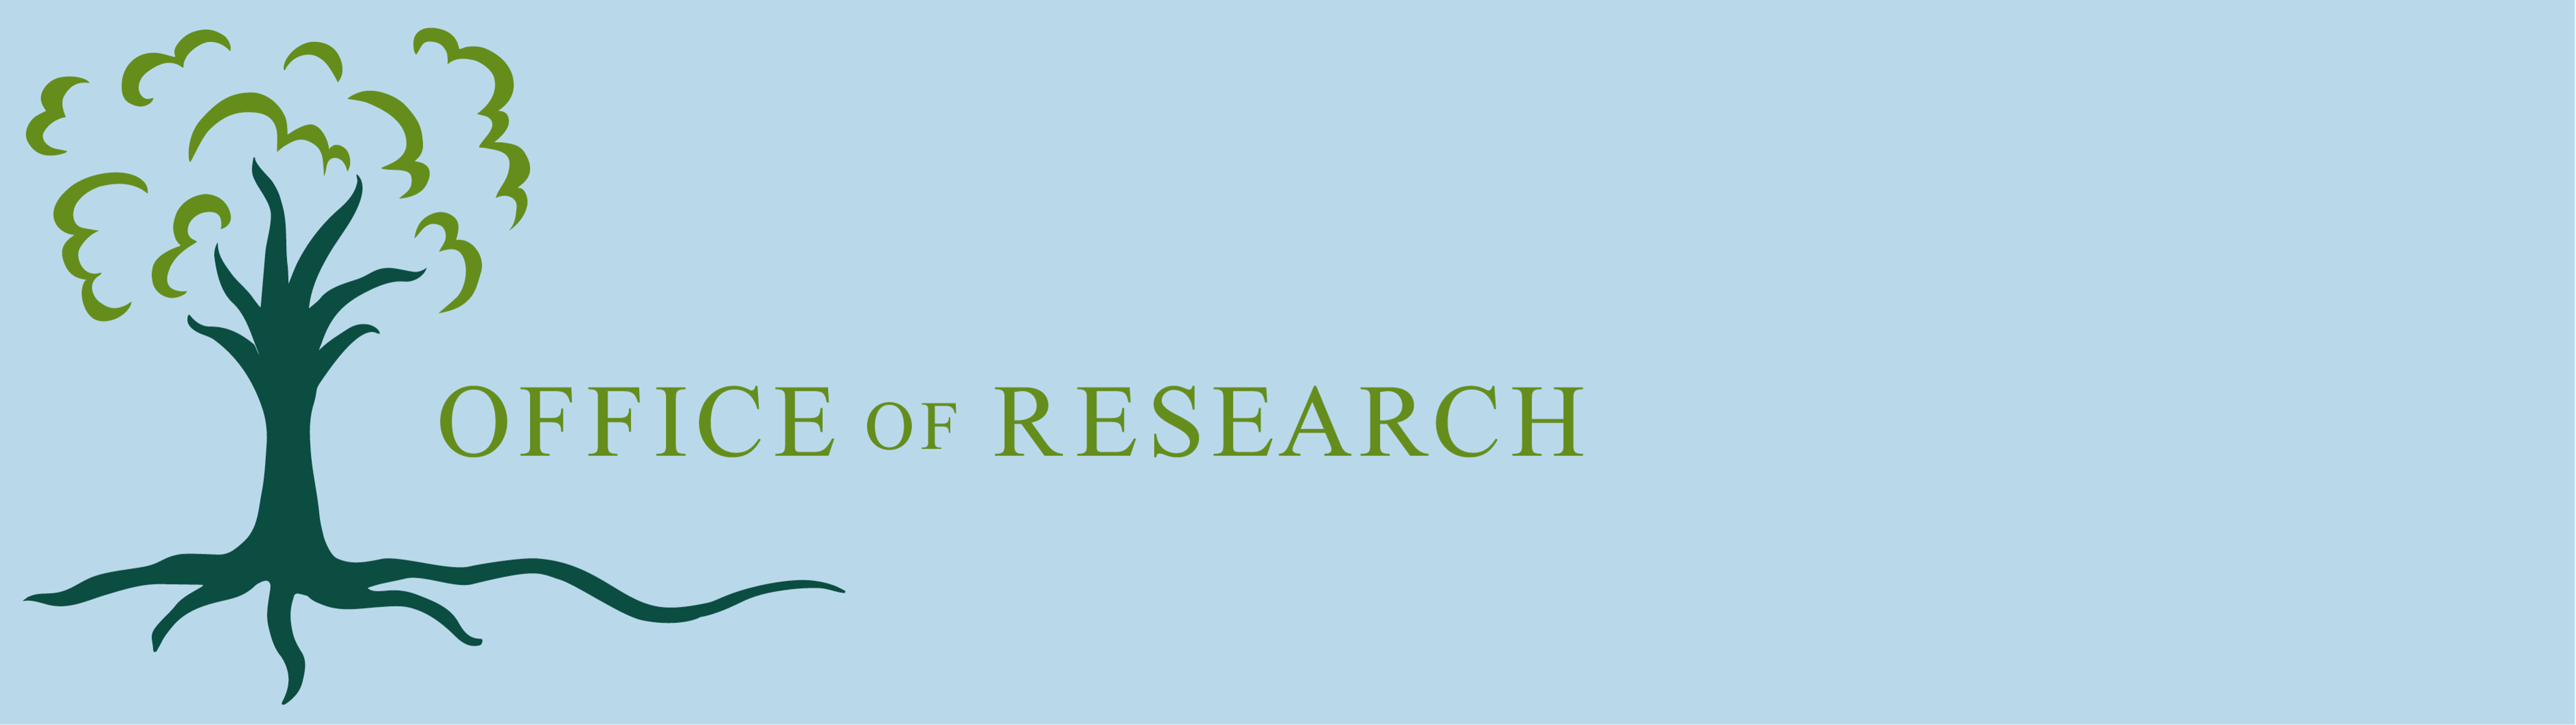 Office of Research banner logo